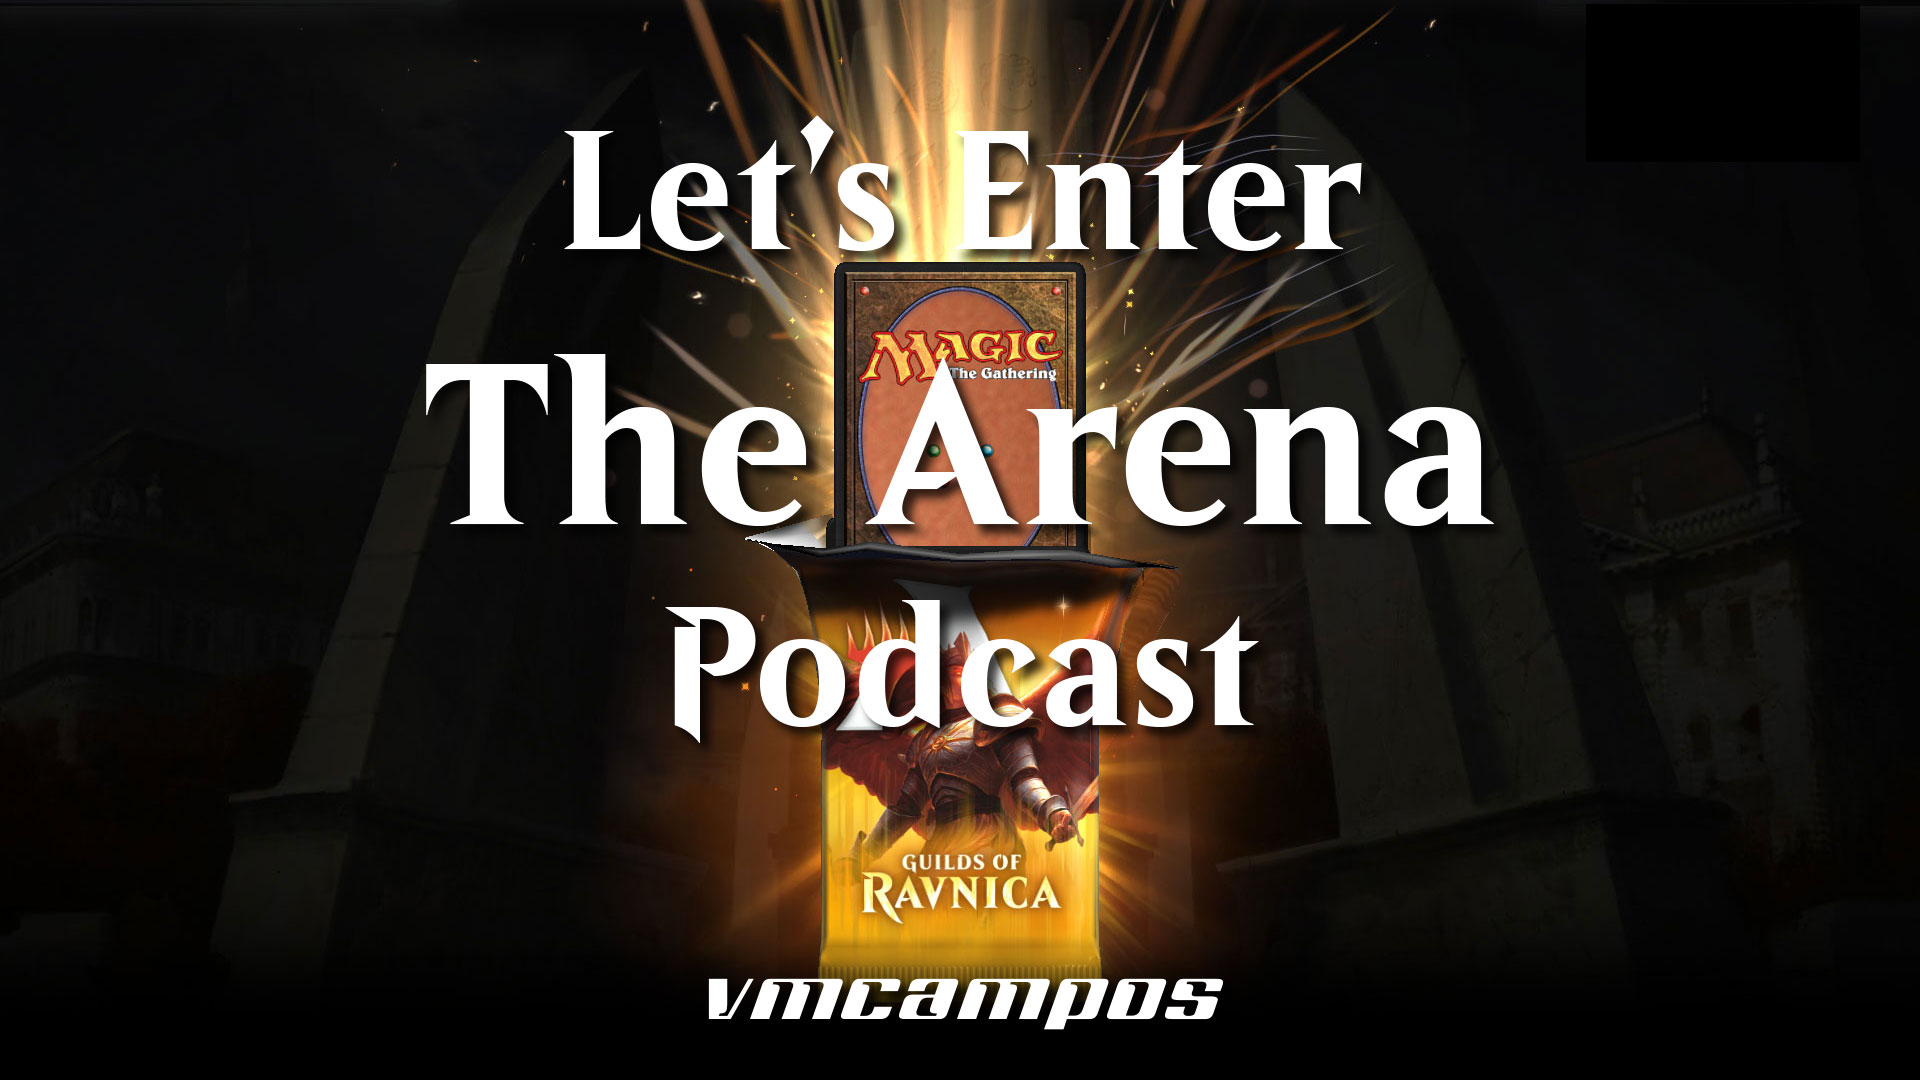 Let's Enter the Arena